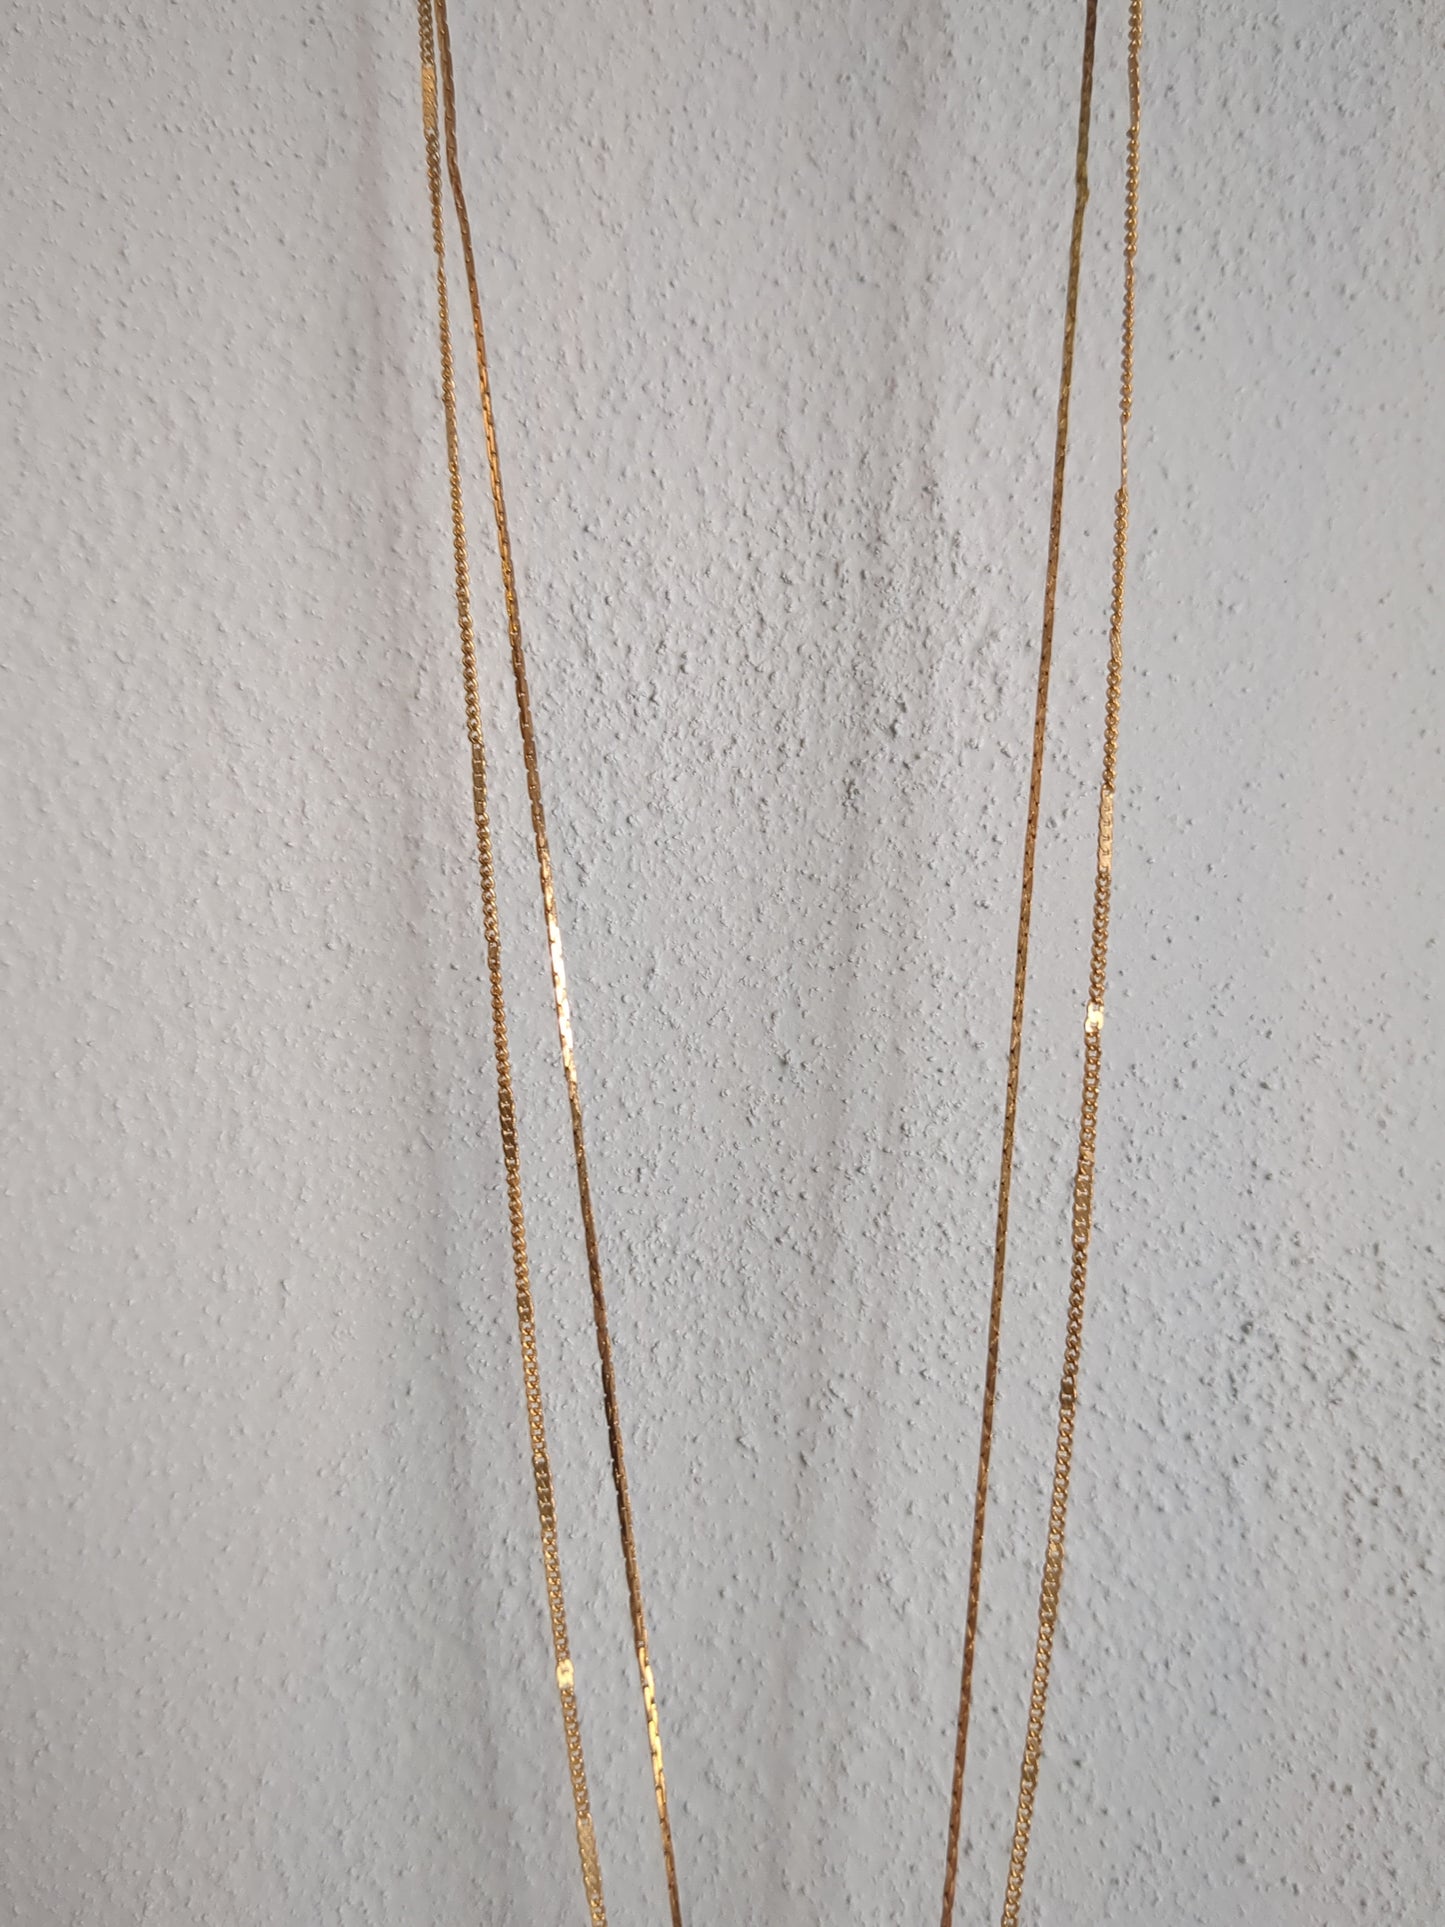 Vintage look gold tassel necklace with white stone